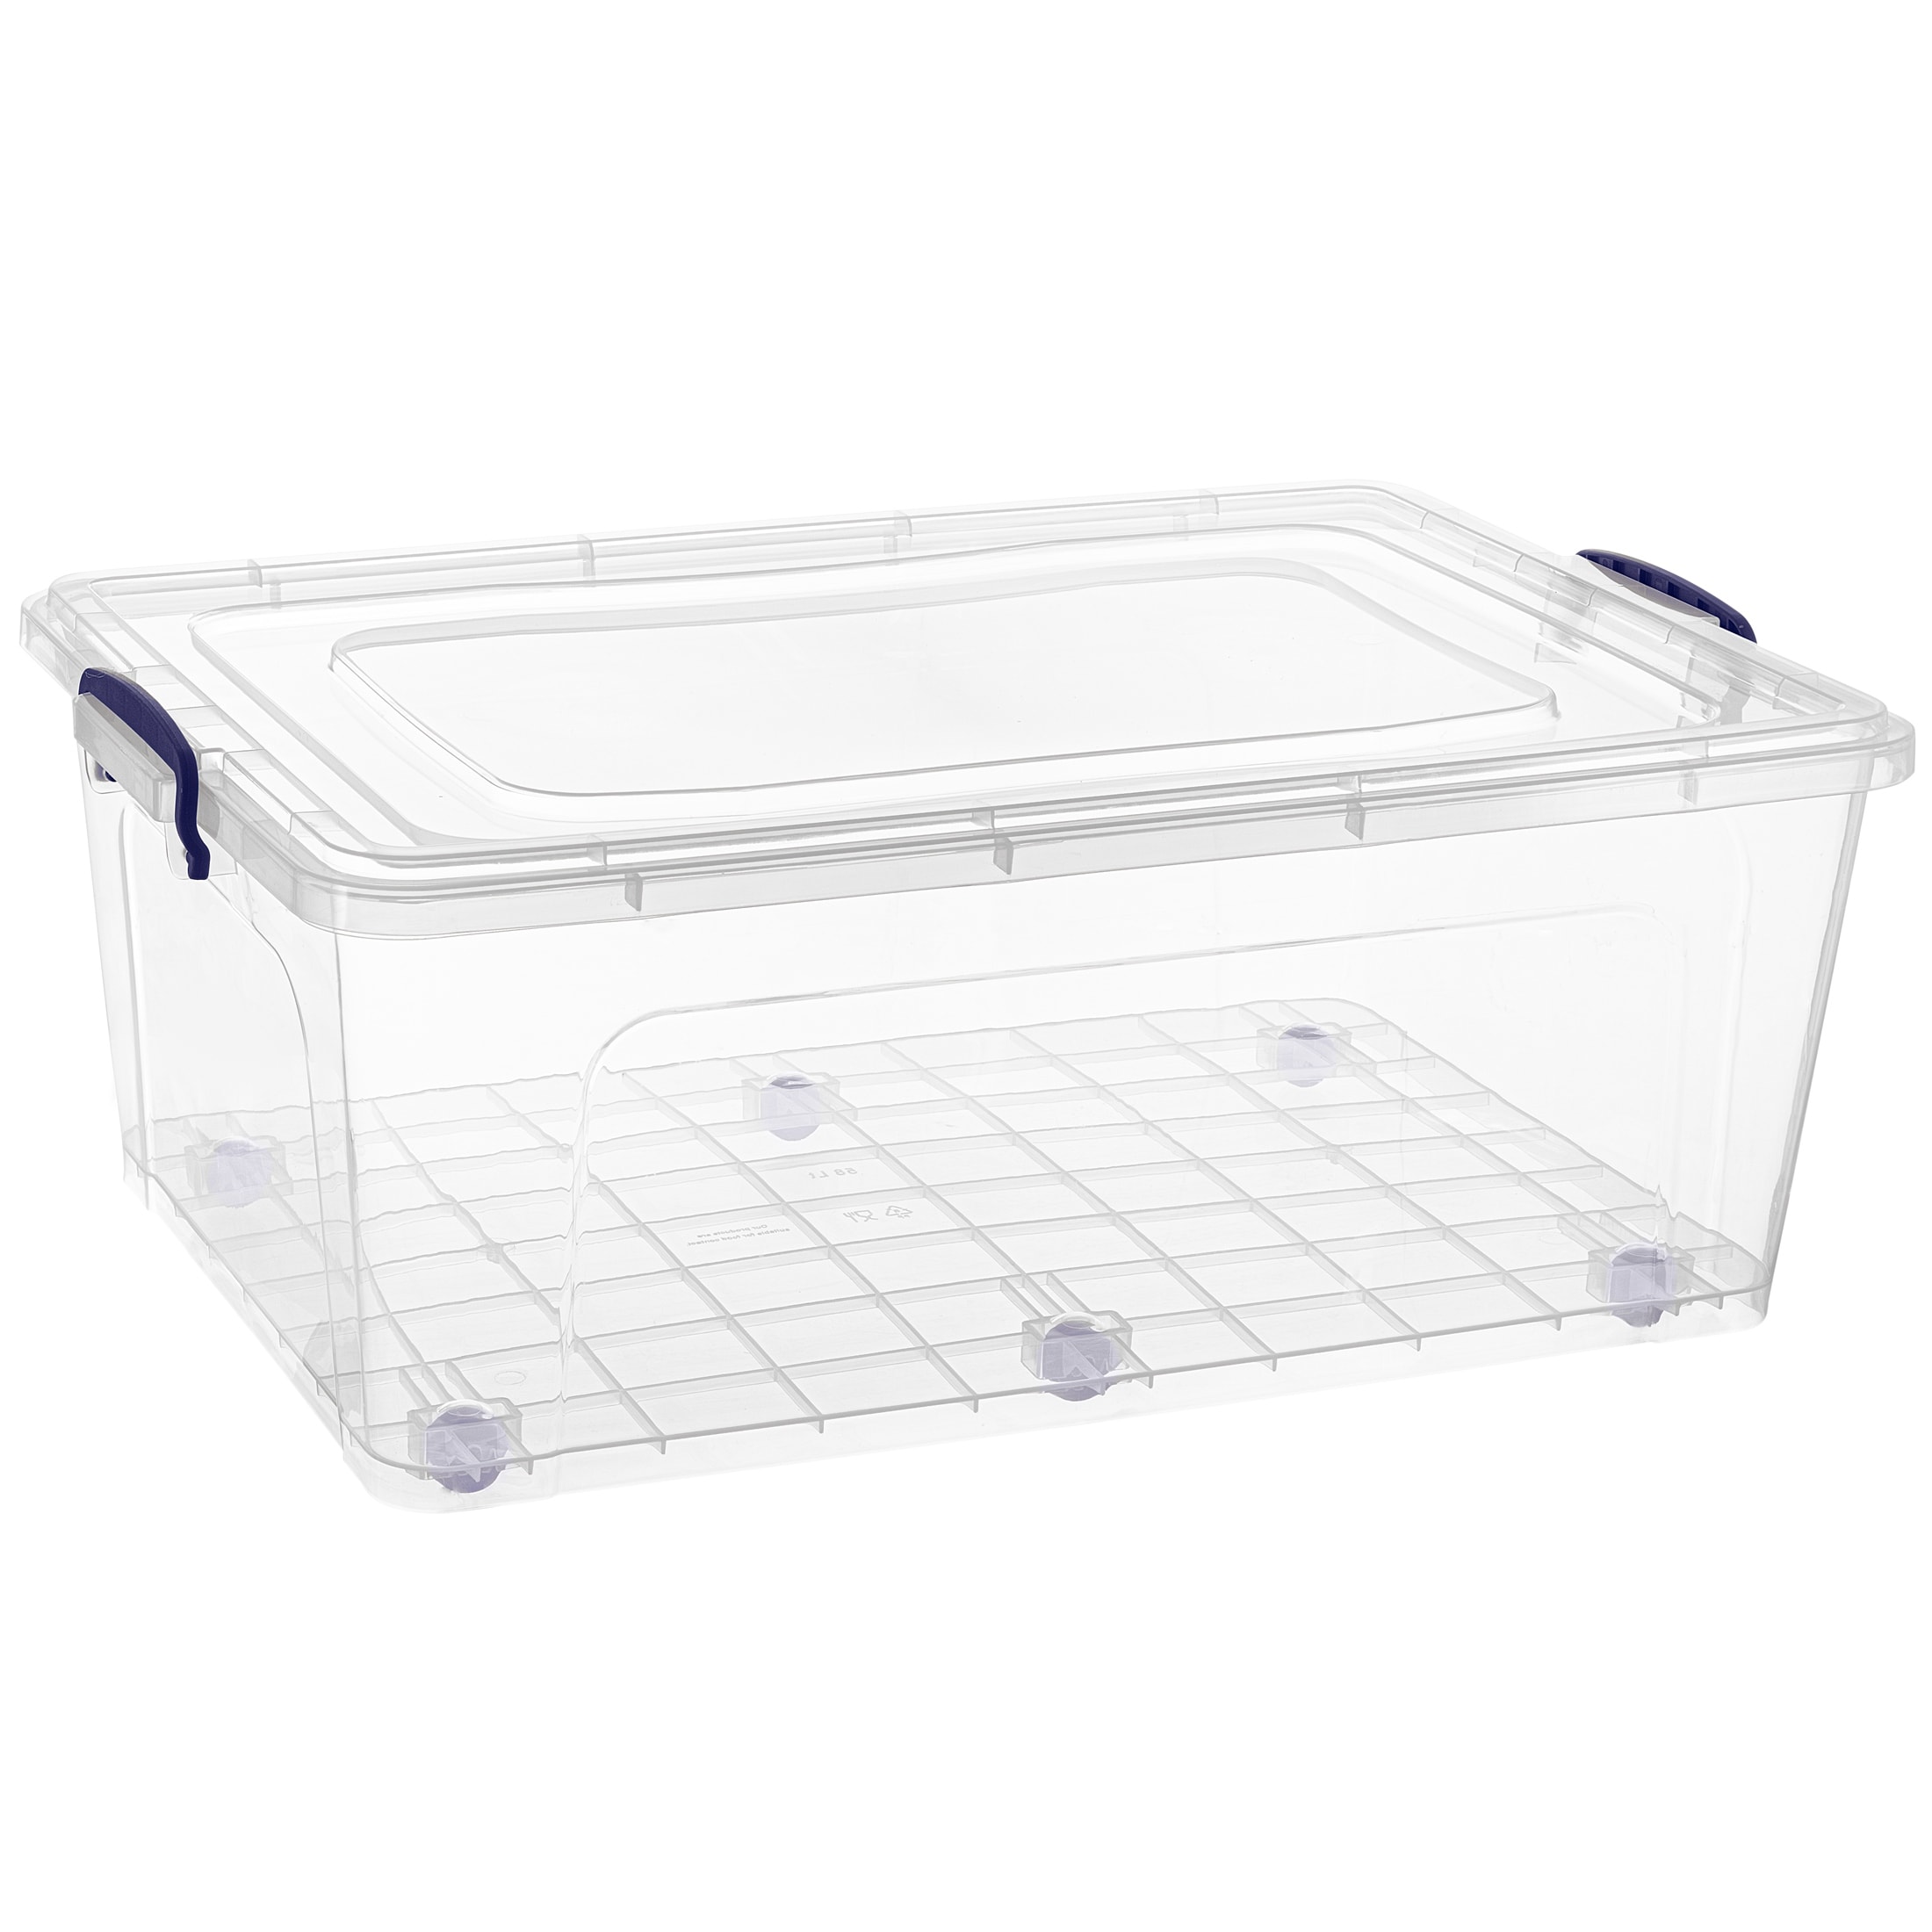 https://ak1.ostkcdn.com/images/products/is/images/direct/717b1d5ca92231c5d0150ca3b109f86998f90c88/Superio-Wheeled-Clear-Storage-Container-with-Lid.jpg